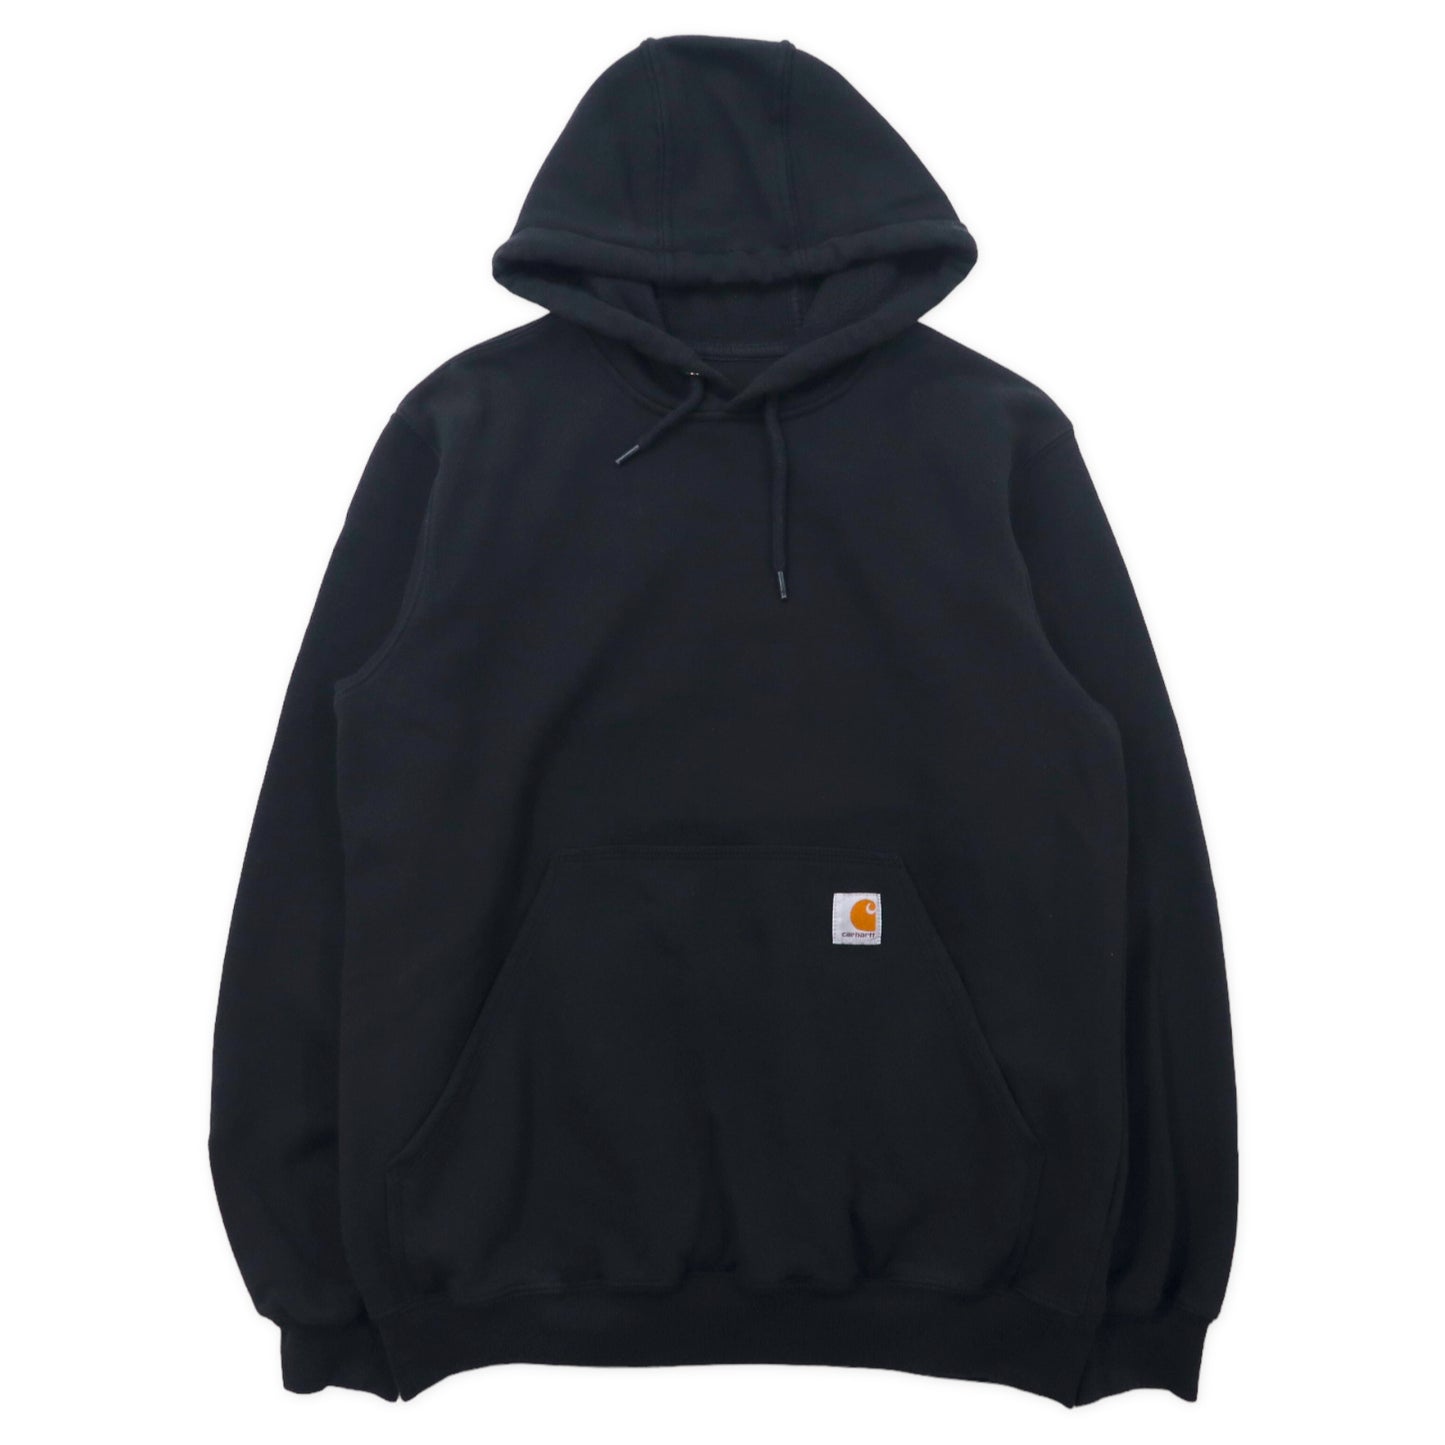 CARHARTT Big Size Pullover HOODIE S Black Cotton Brushed Lining